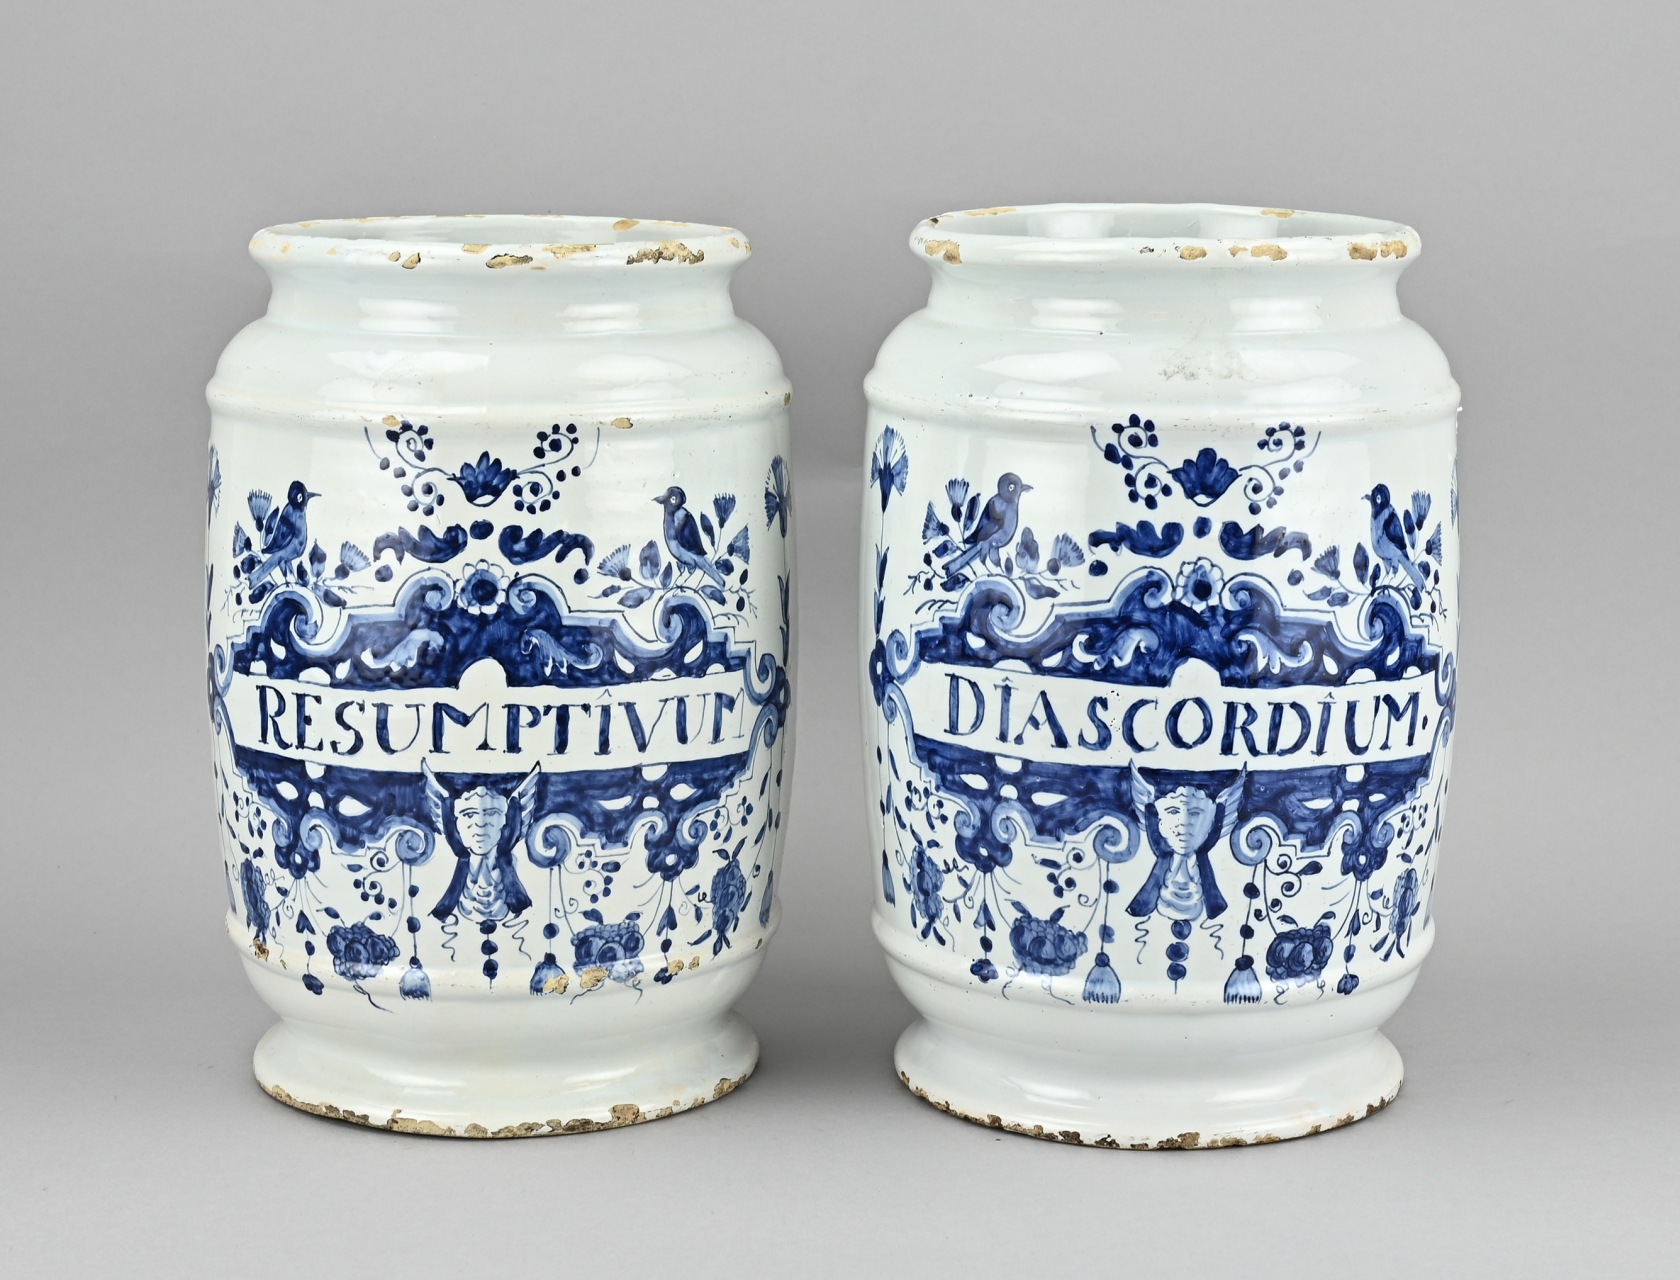 Two very large apothecary jars